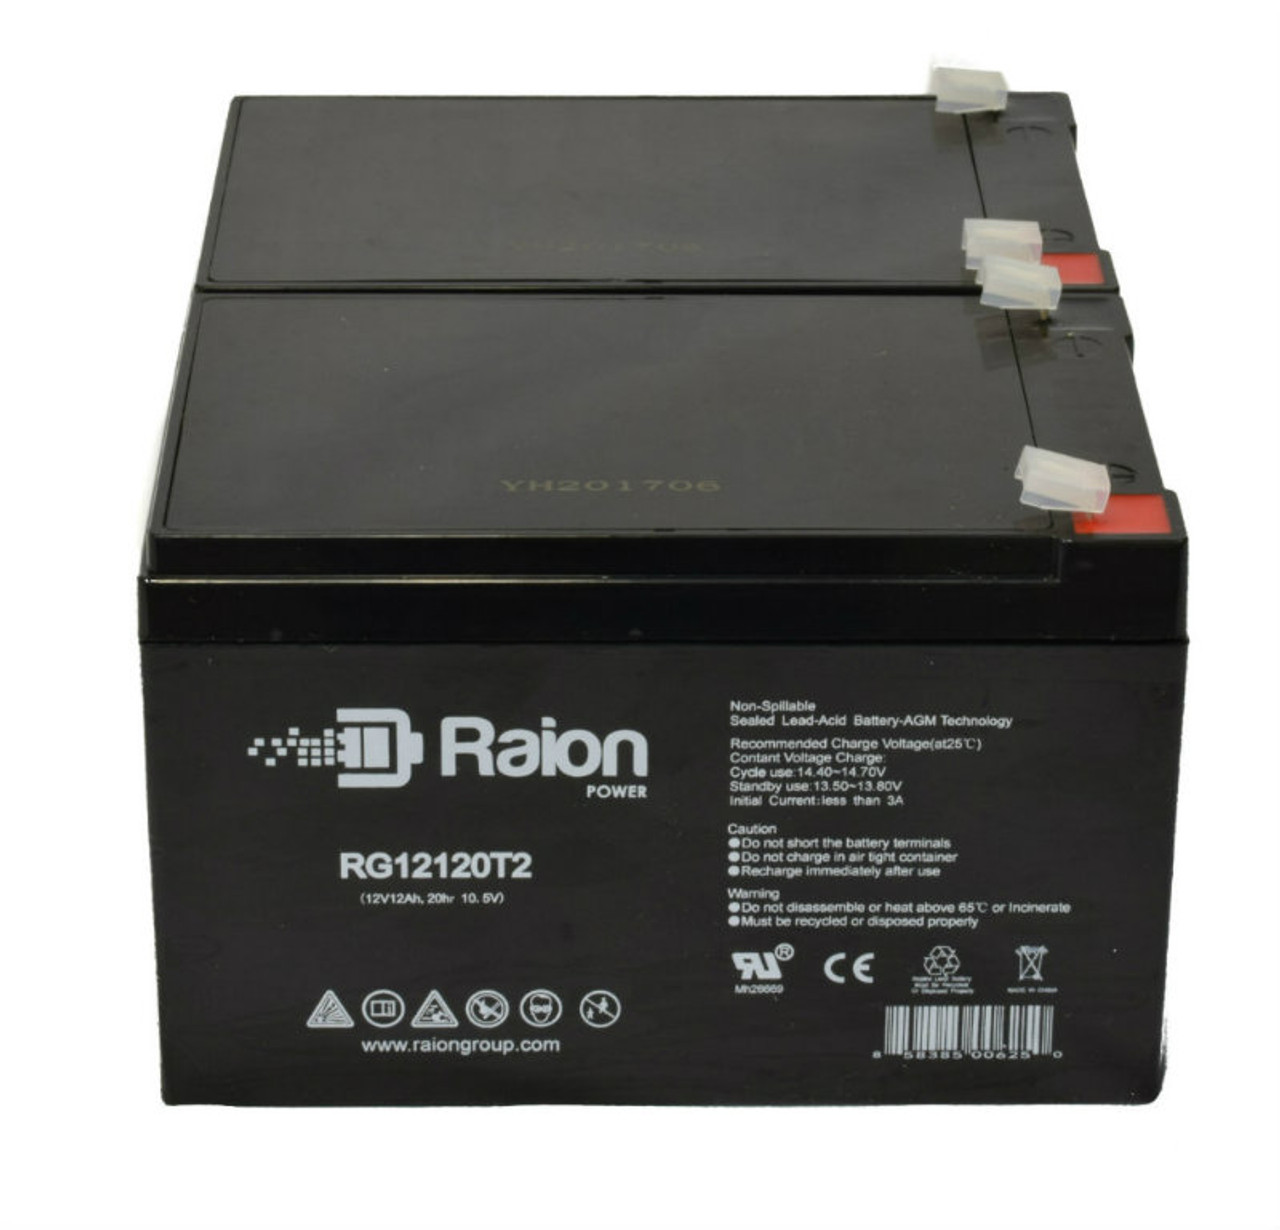 Raion Power 12V 12Ah Non-Spillable Compatible Replacement Battery for Universal UB12150 - (2 Pack)